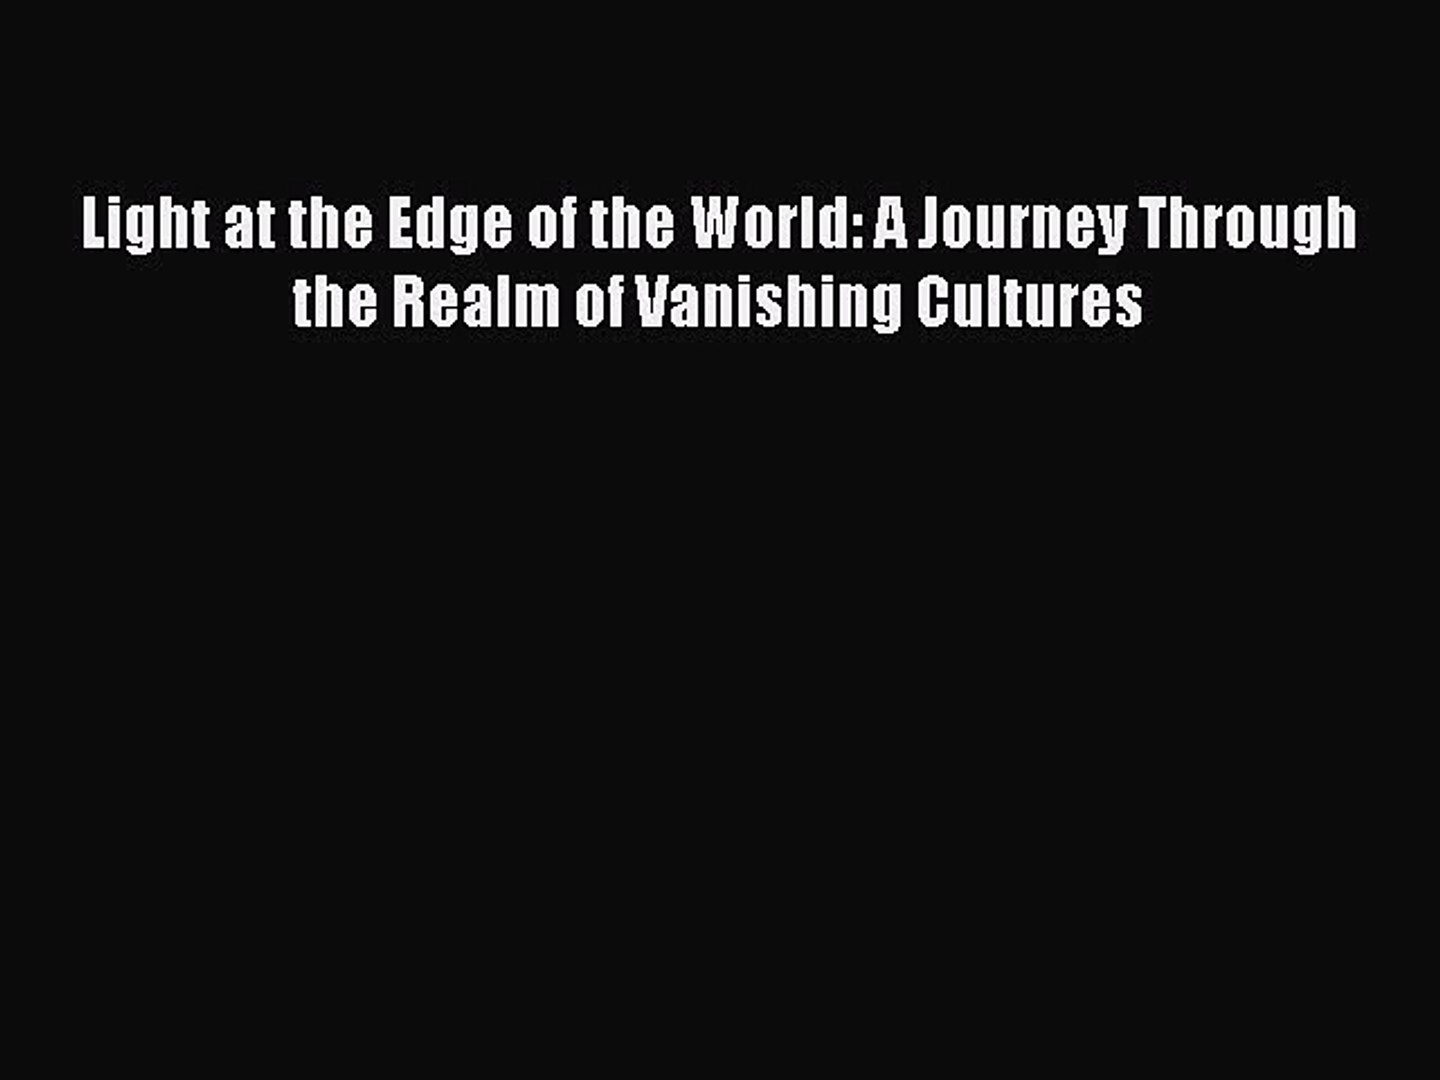 Light at the Edge of the World A Journey Through the Realm of Vanishing Cultures